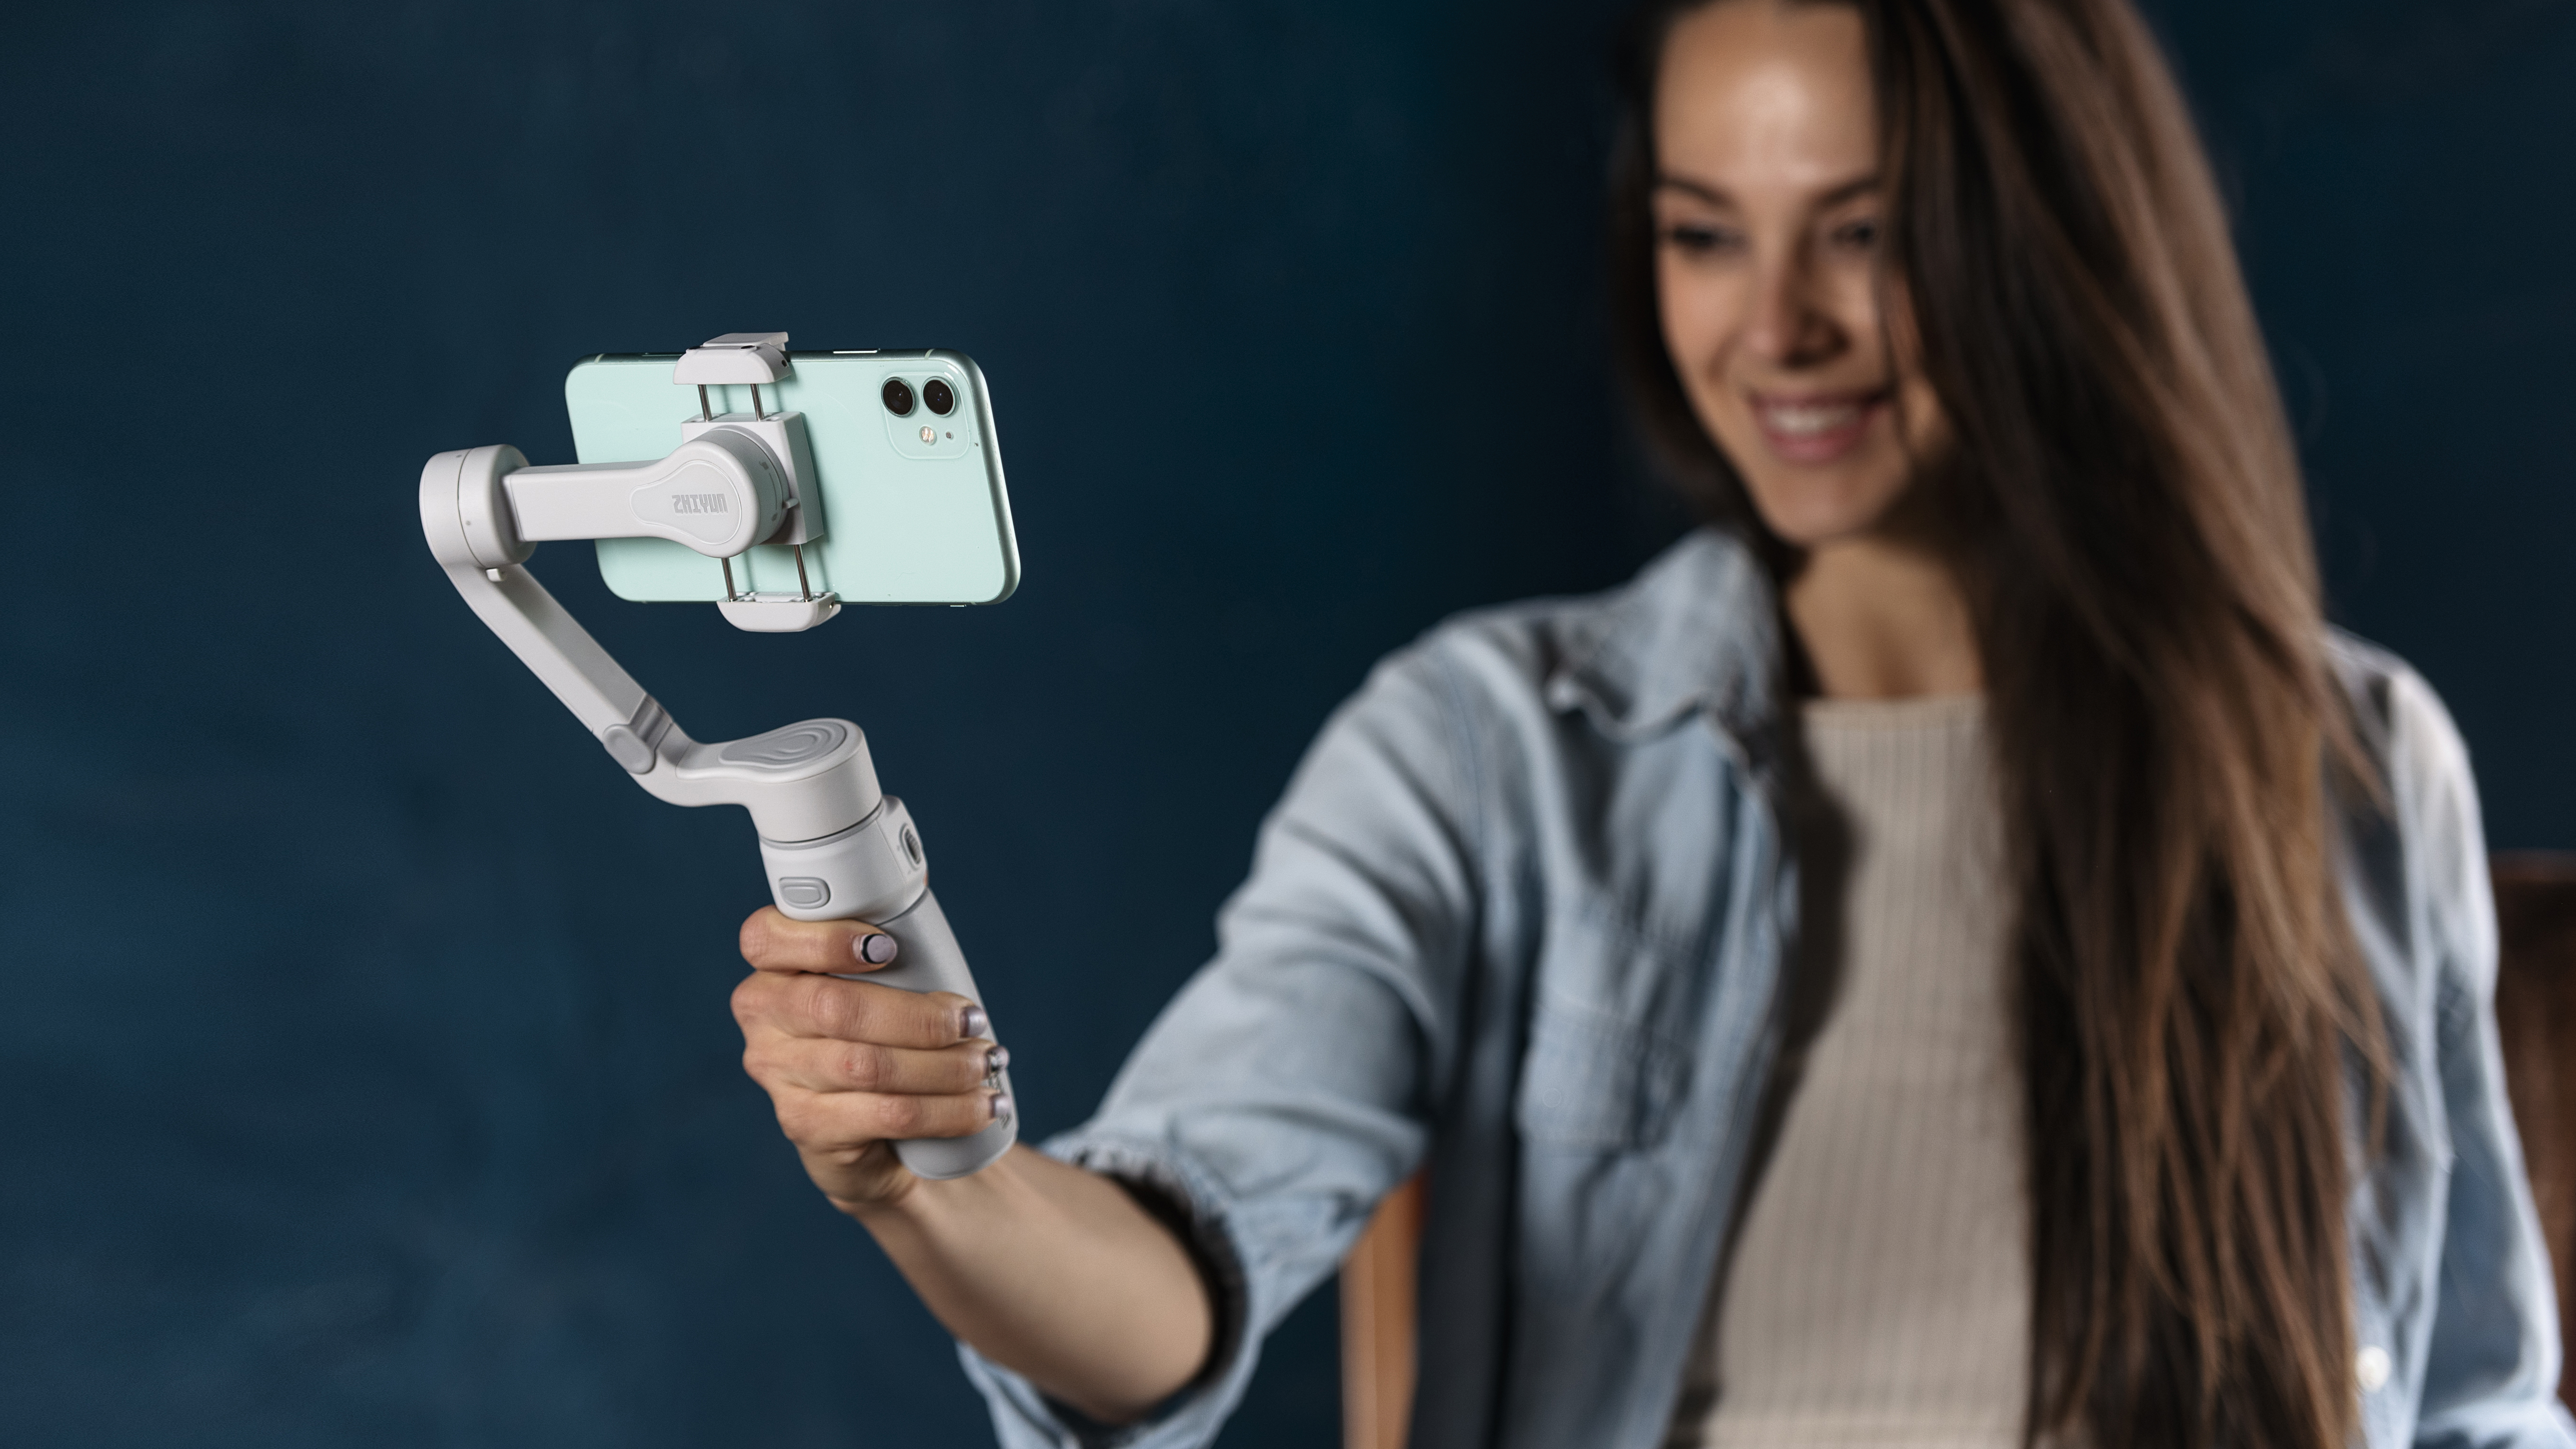 DJI's best smartphone gimbal now tracks subjects better than ever